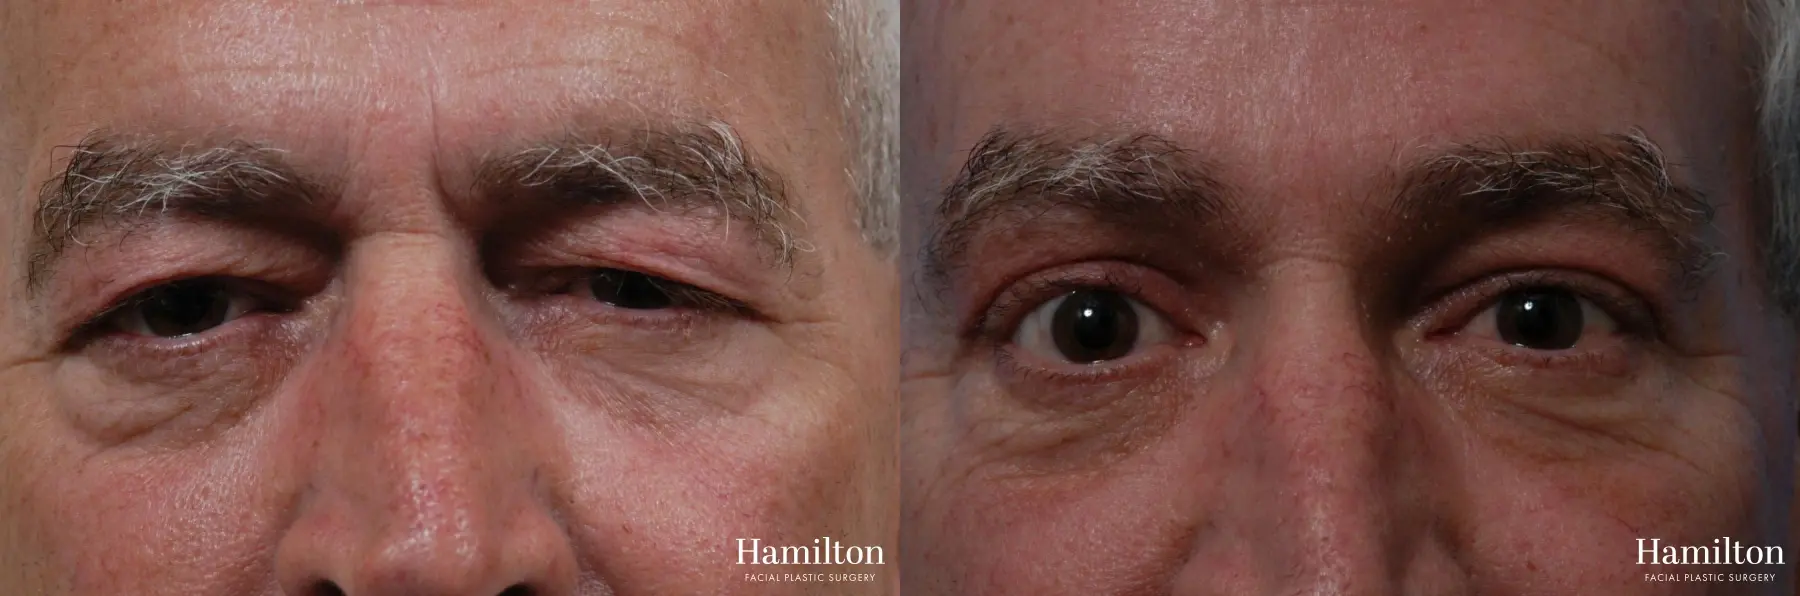 Brow Lift: Patient 8 - Before and After 1